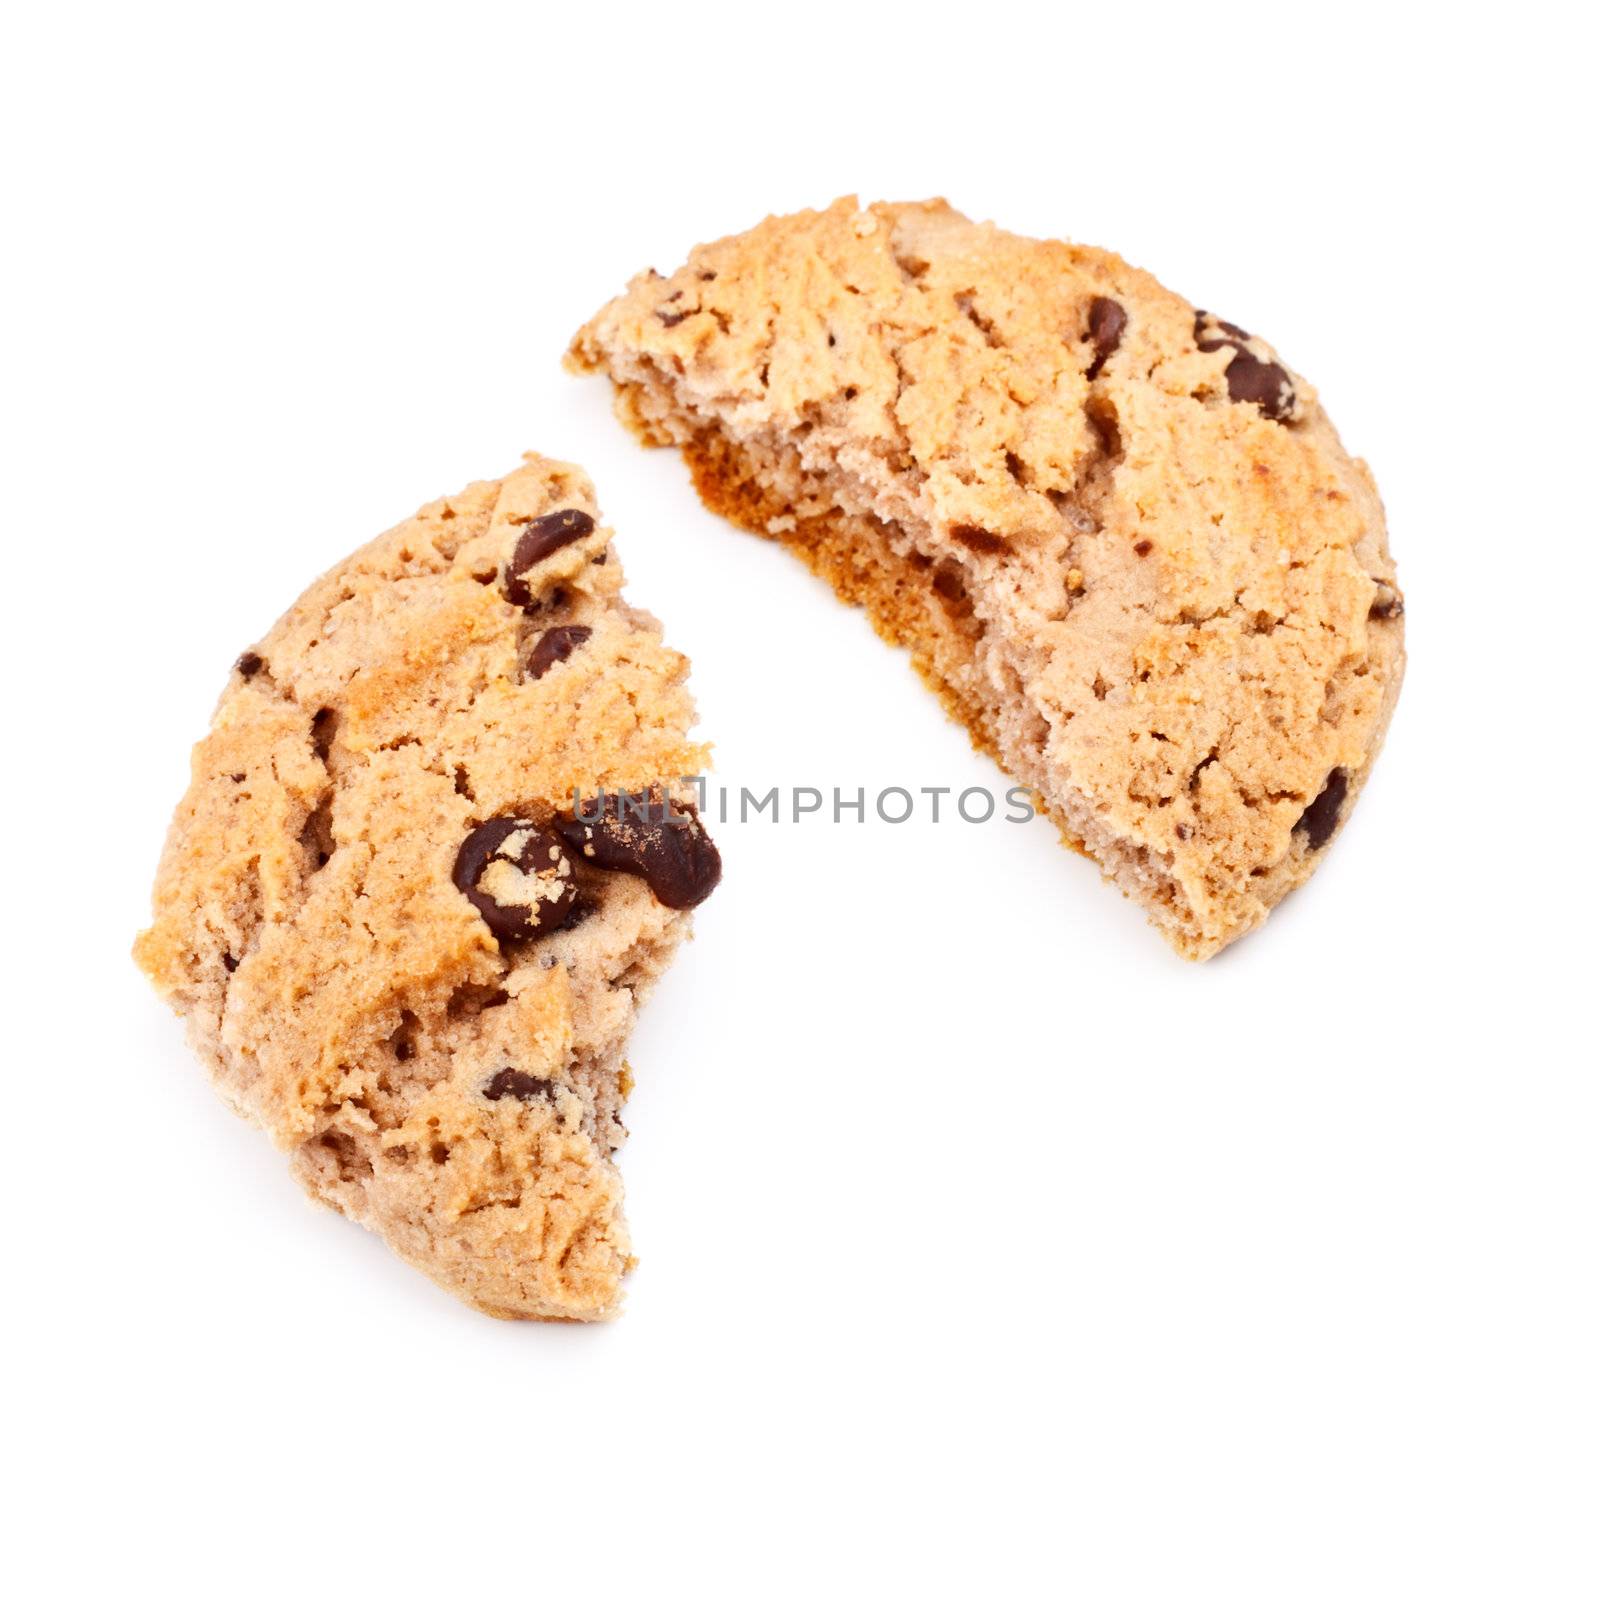 oatmeal chocolate chip cookie pieces, isolated on white